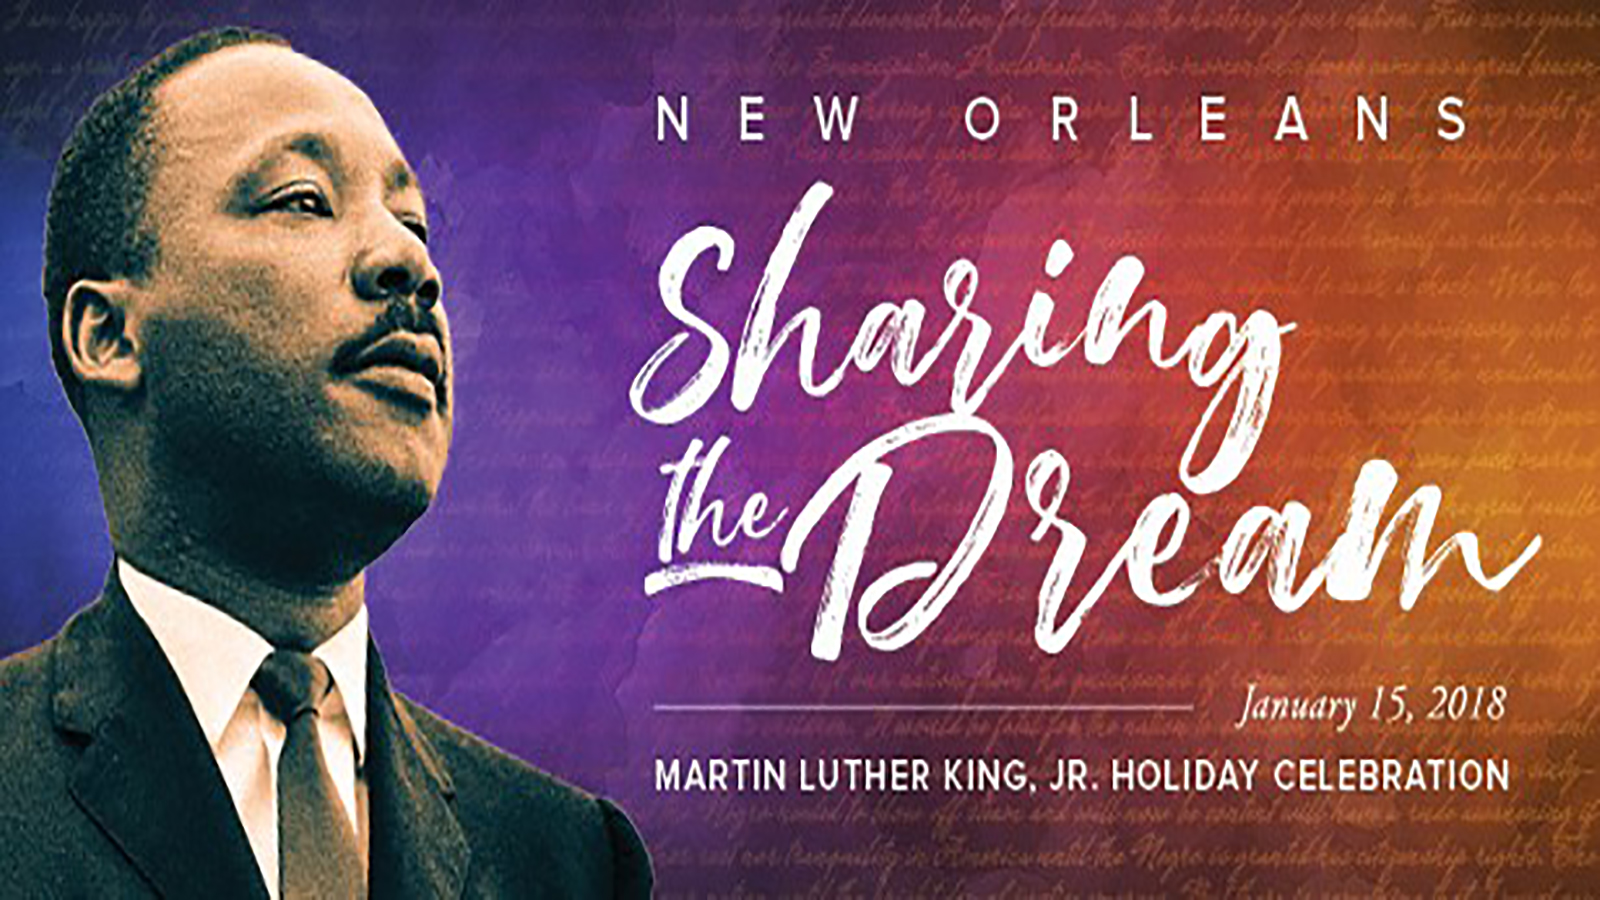 List of Martin Luther King, Jr. Day events